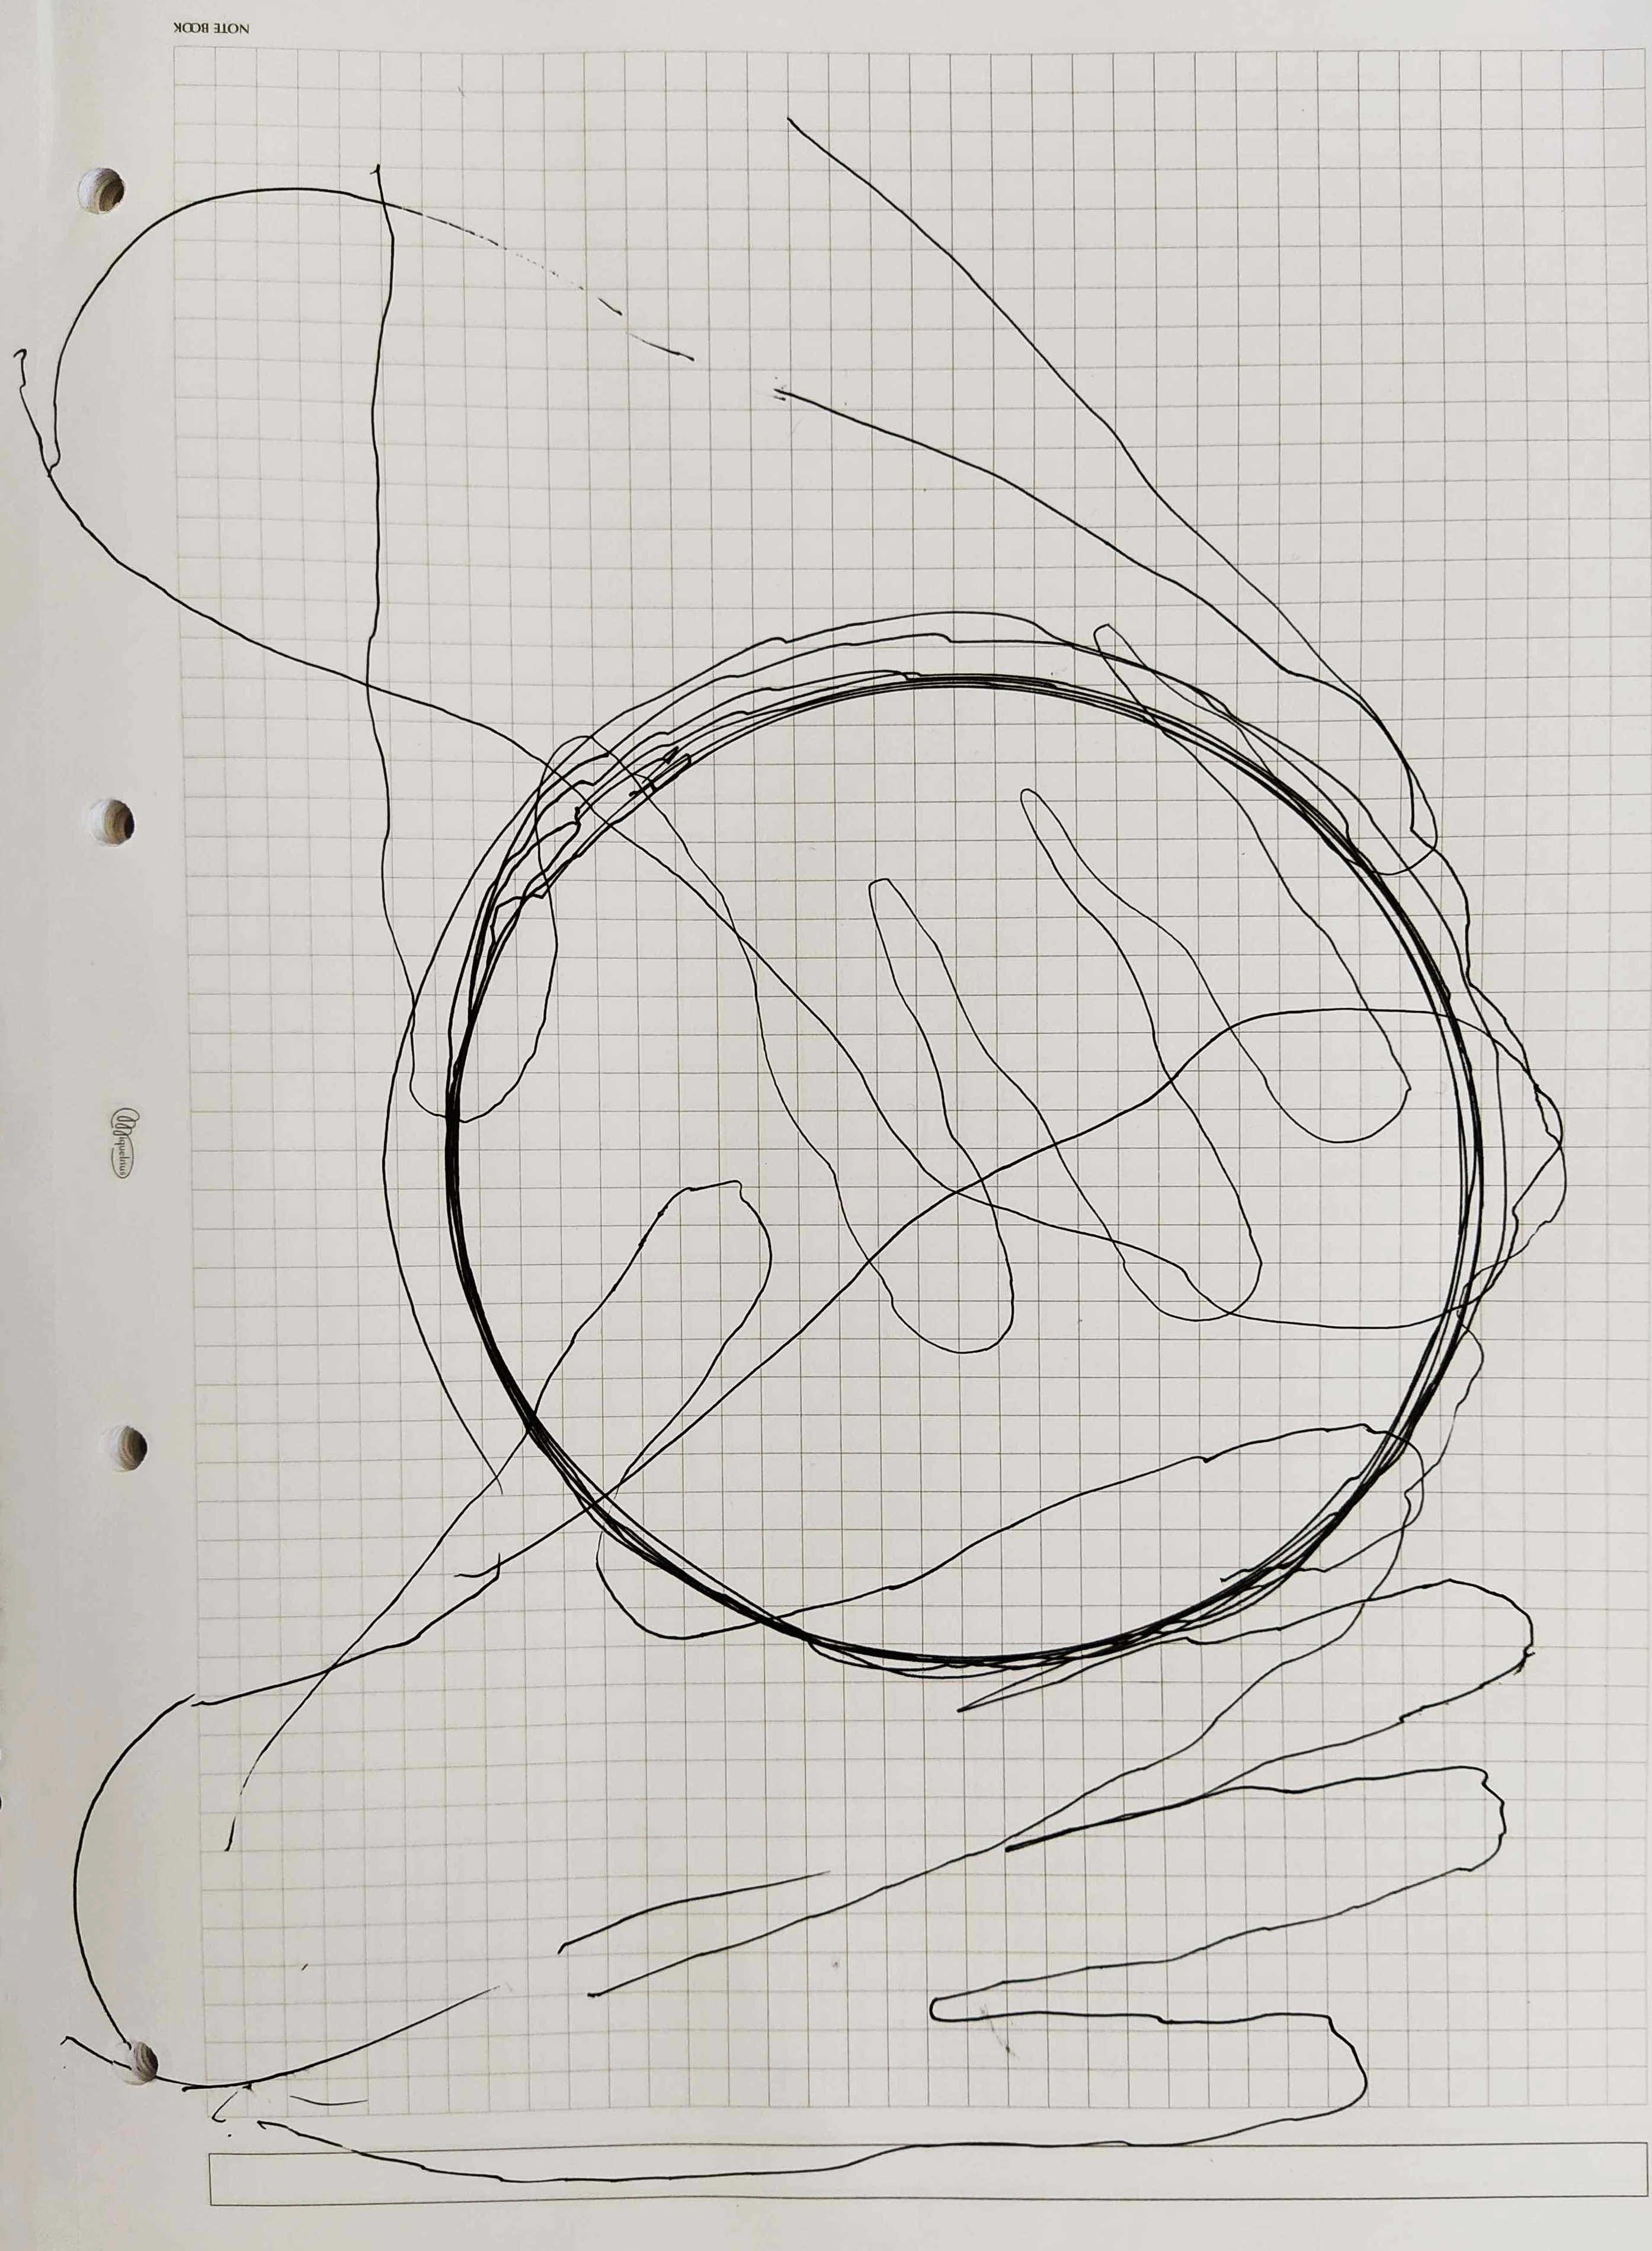 10. Drawings by Curating Positions study group participants; Outcomes from Clara Saito’s  workshop, June 2020